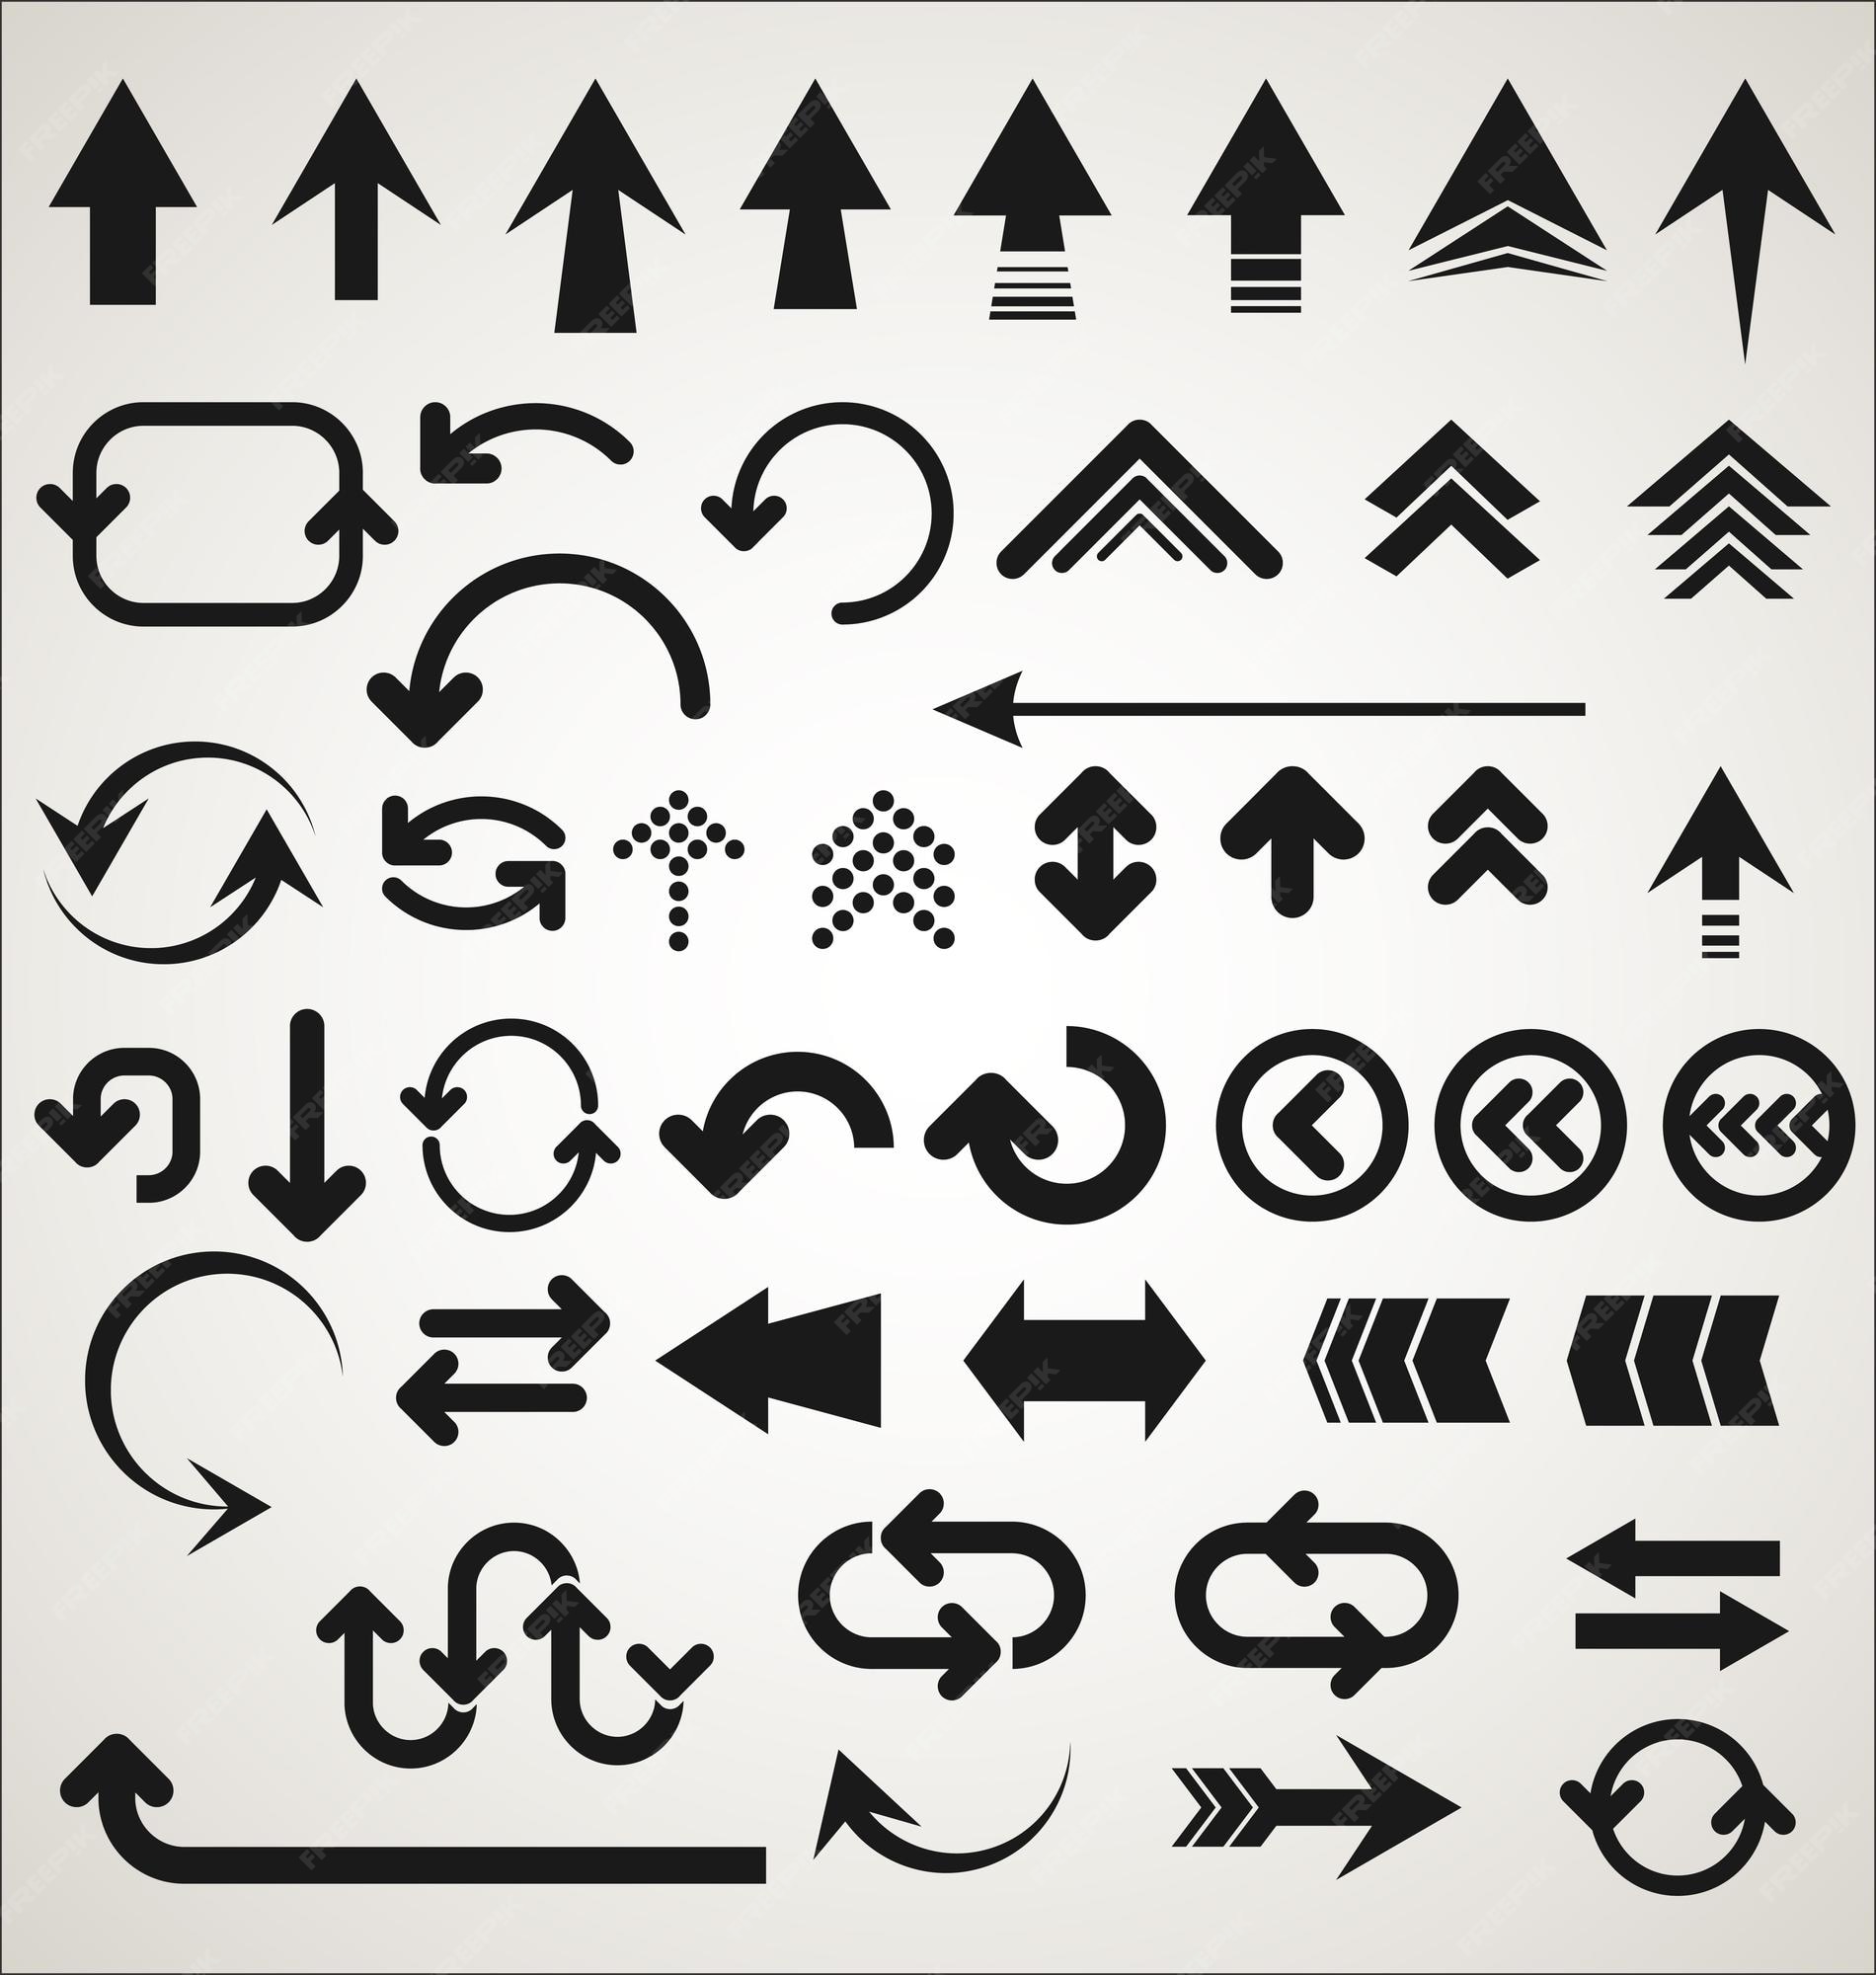 download arrow shapes for photoshop